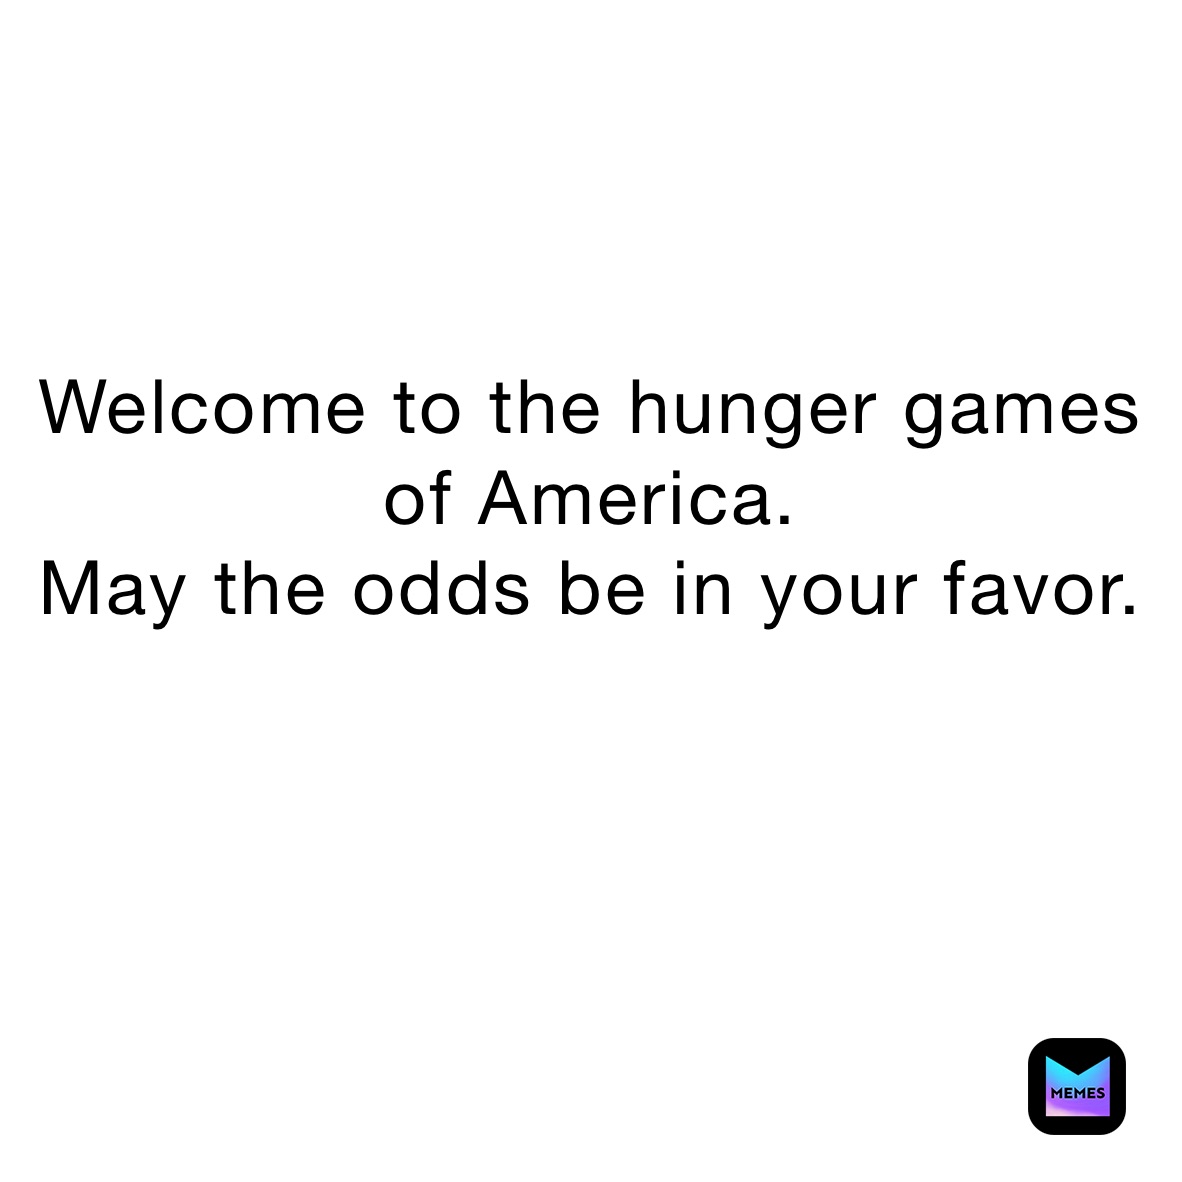 



Welcome to the hunger games of America. 
May the odds be in your favor. 






